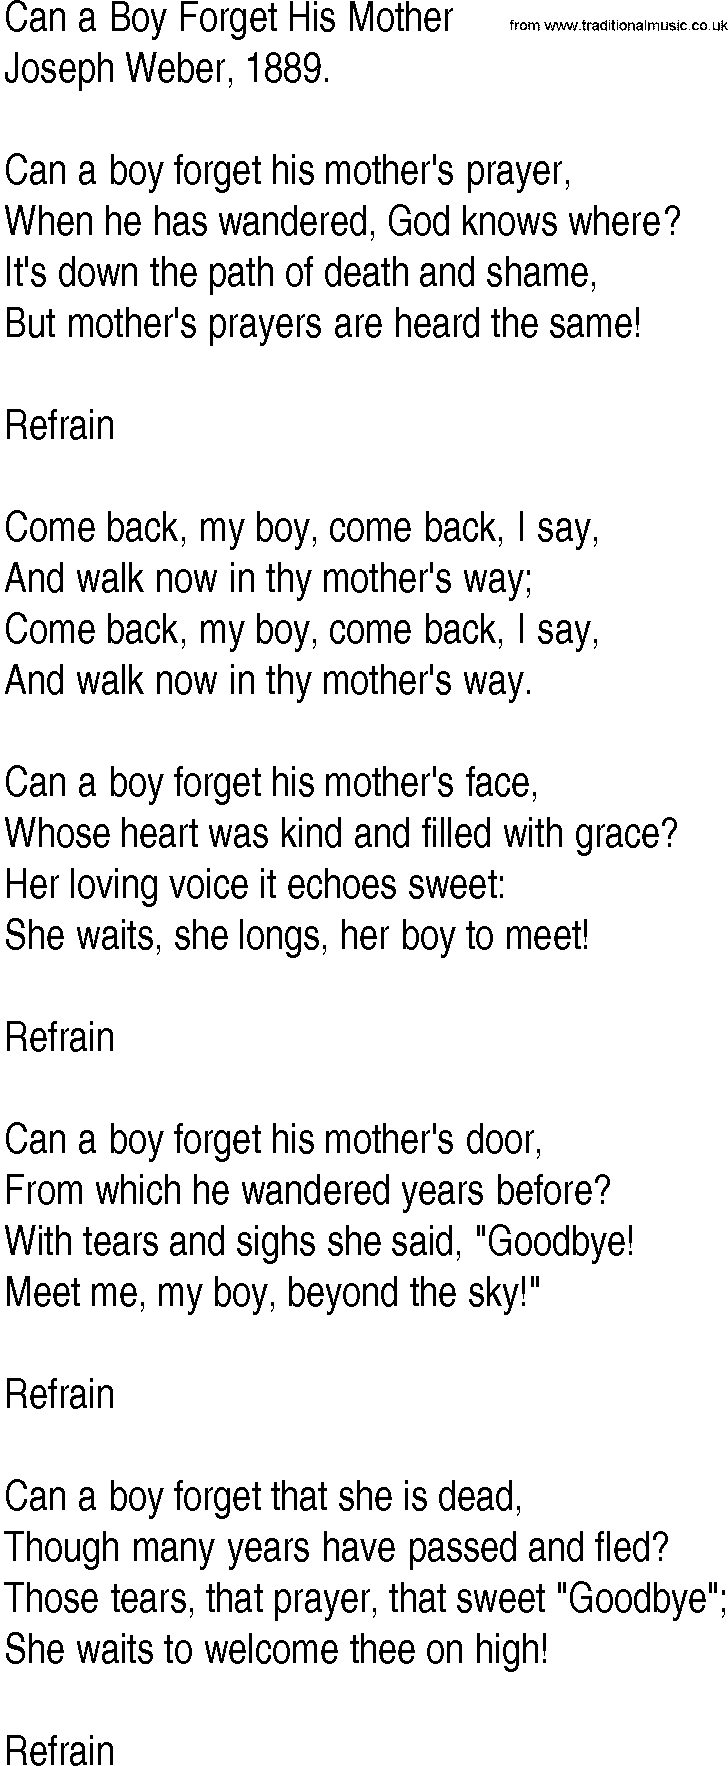 Hymn and Gospel Song: Can a Boy Forget His Mother by Joseph Weber lyrics